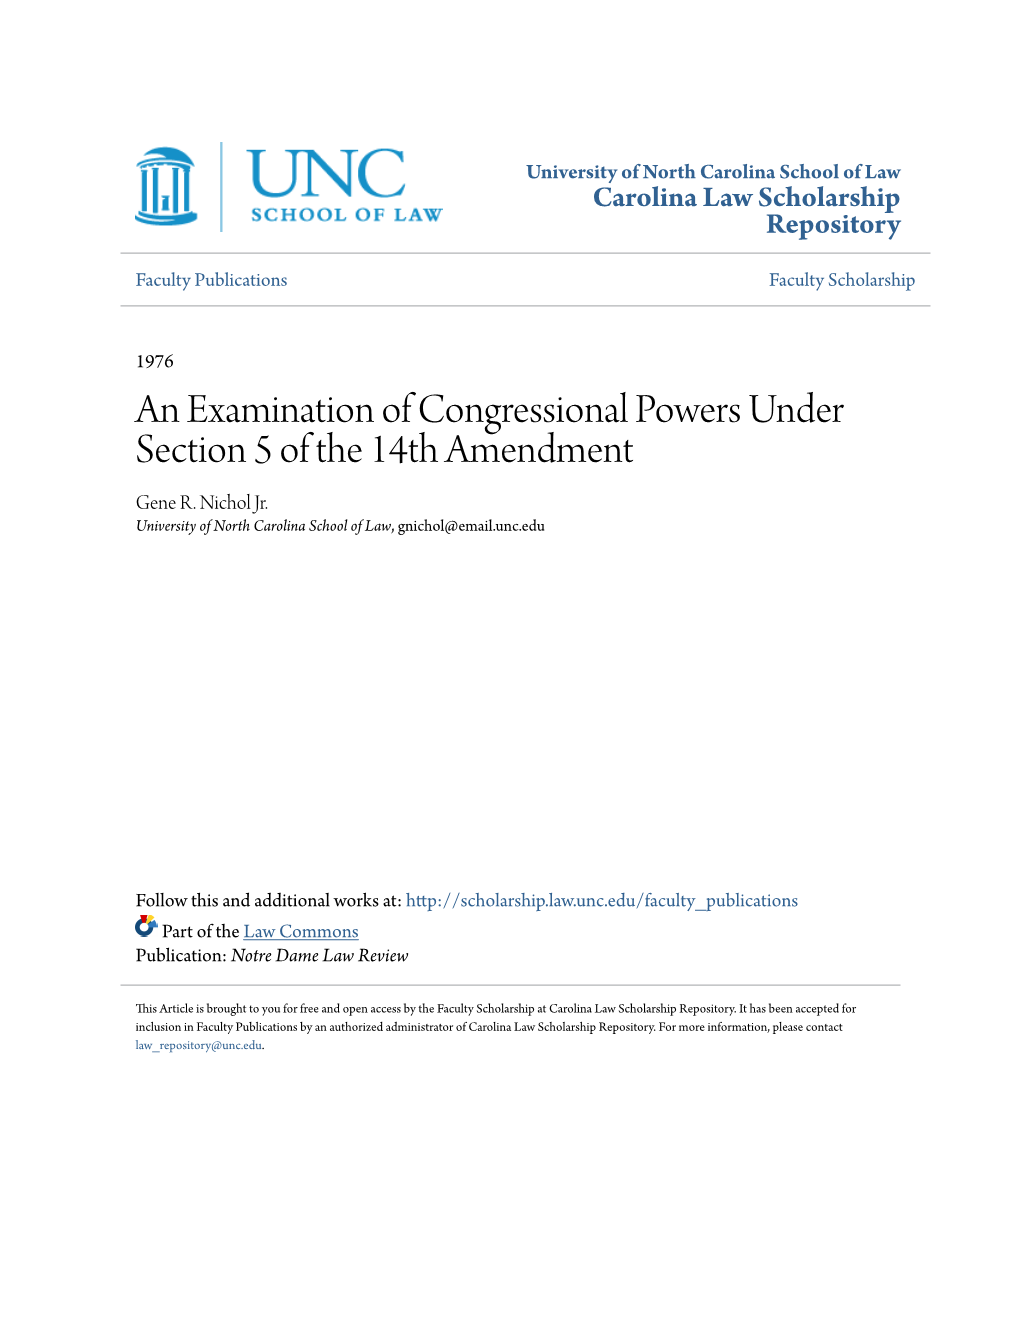 An Examination of Congressional Powers Under Section 5 of the 14Th Amendment Gene R